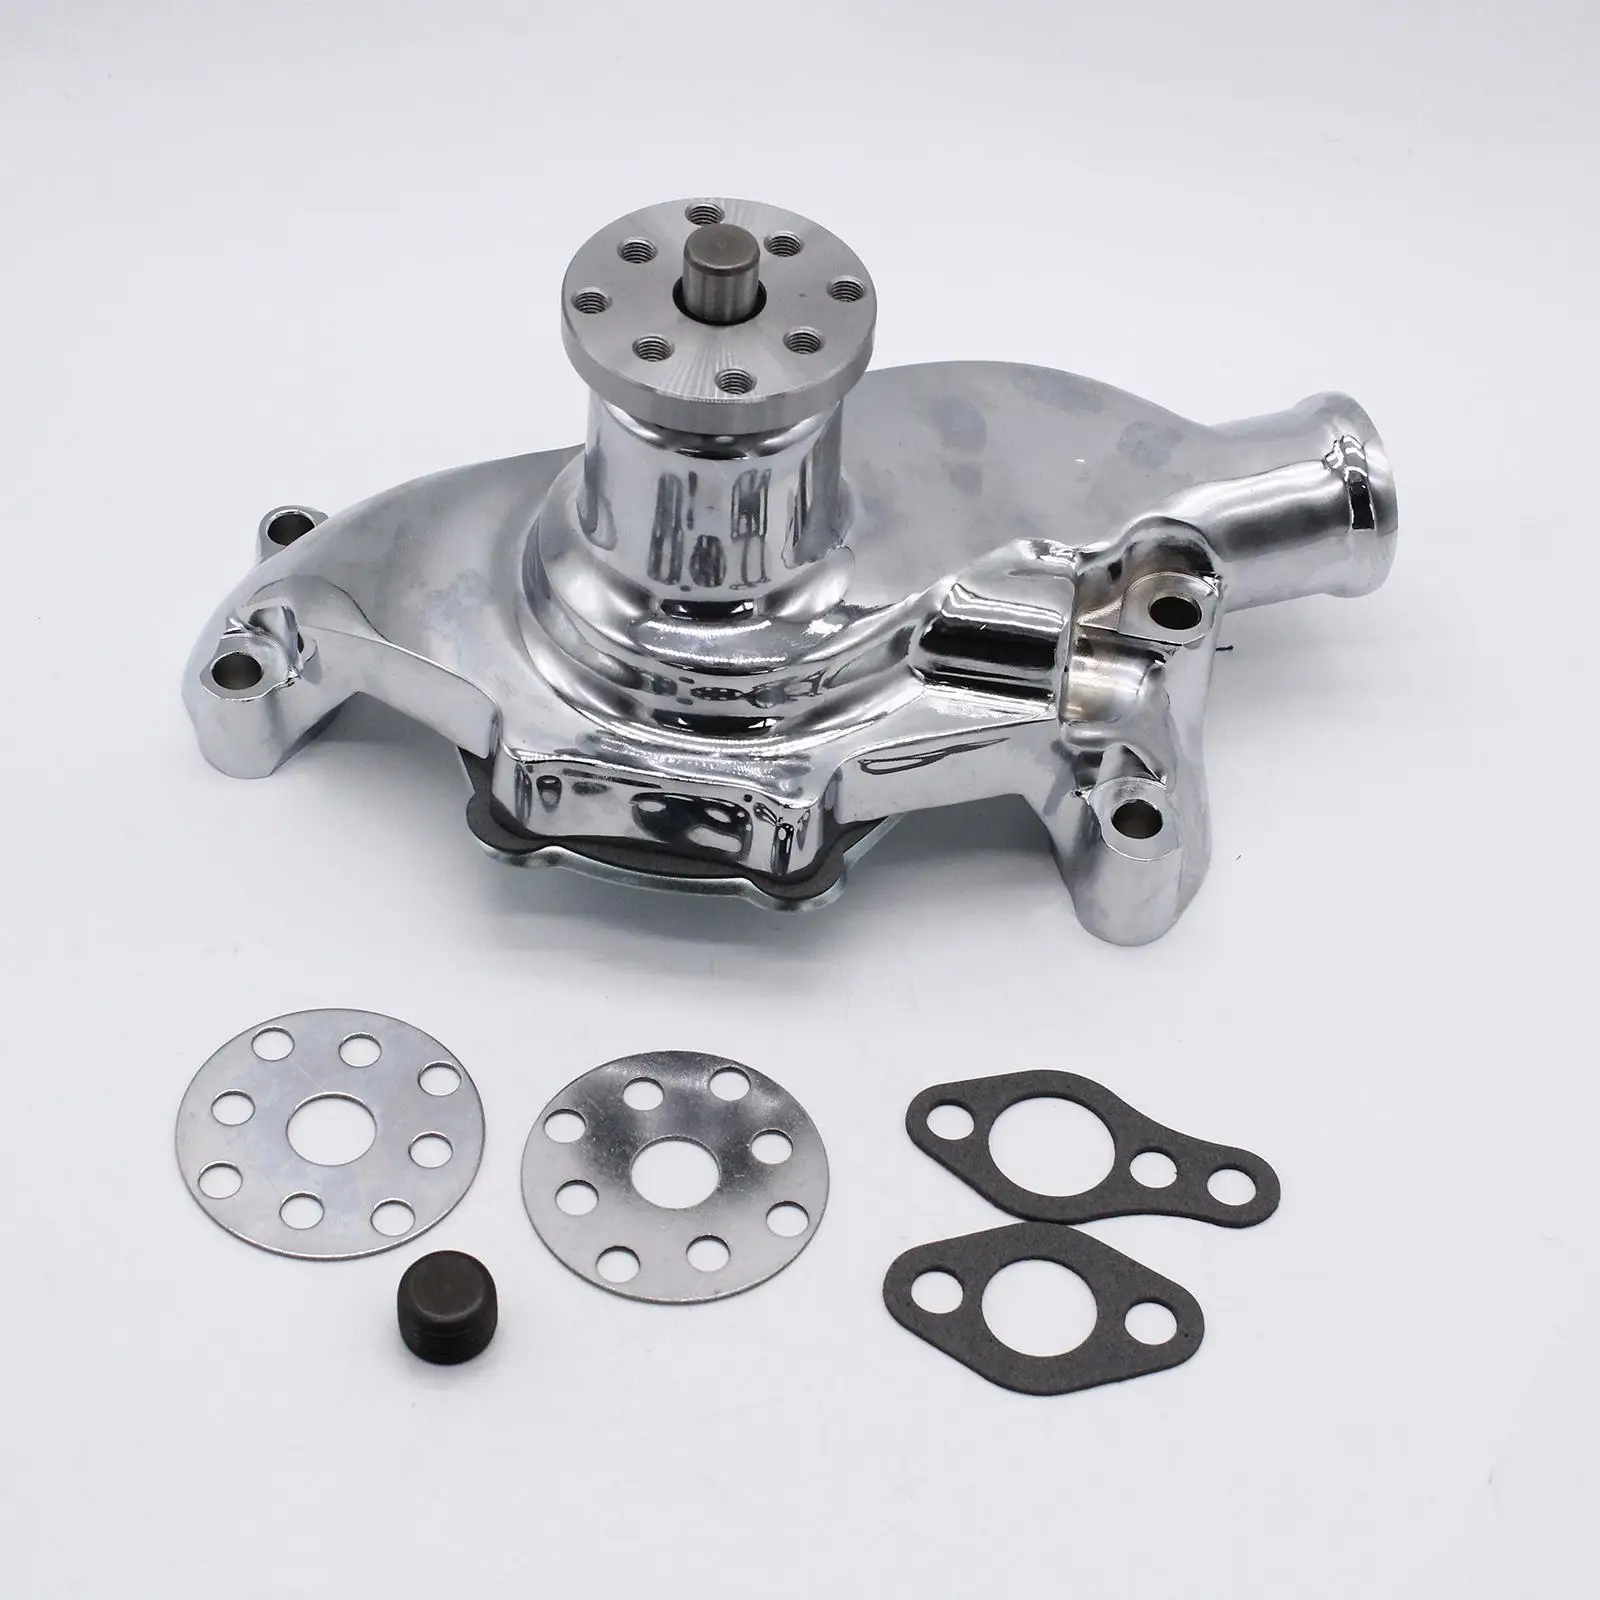 Short Water Pump Professional High Performance Directly Replace High Volume for Chevy SB Sbc 283 327 350 383 V8 Accessory